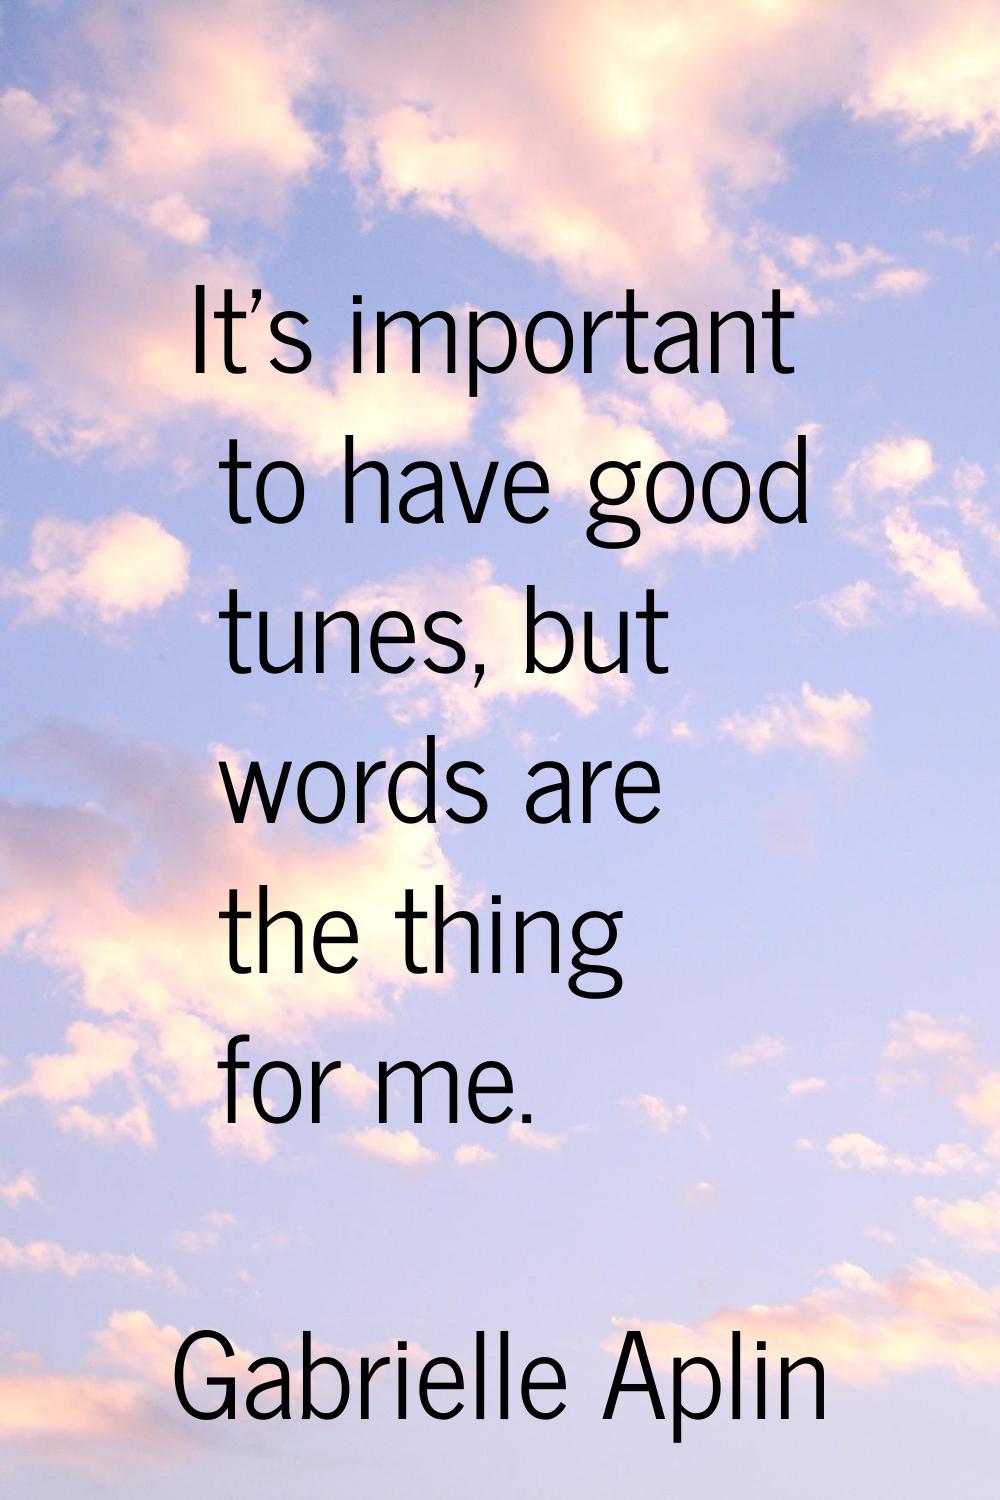 It's important to have good tunes, but words are the thing for me.